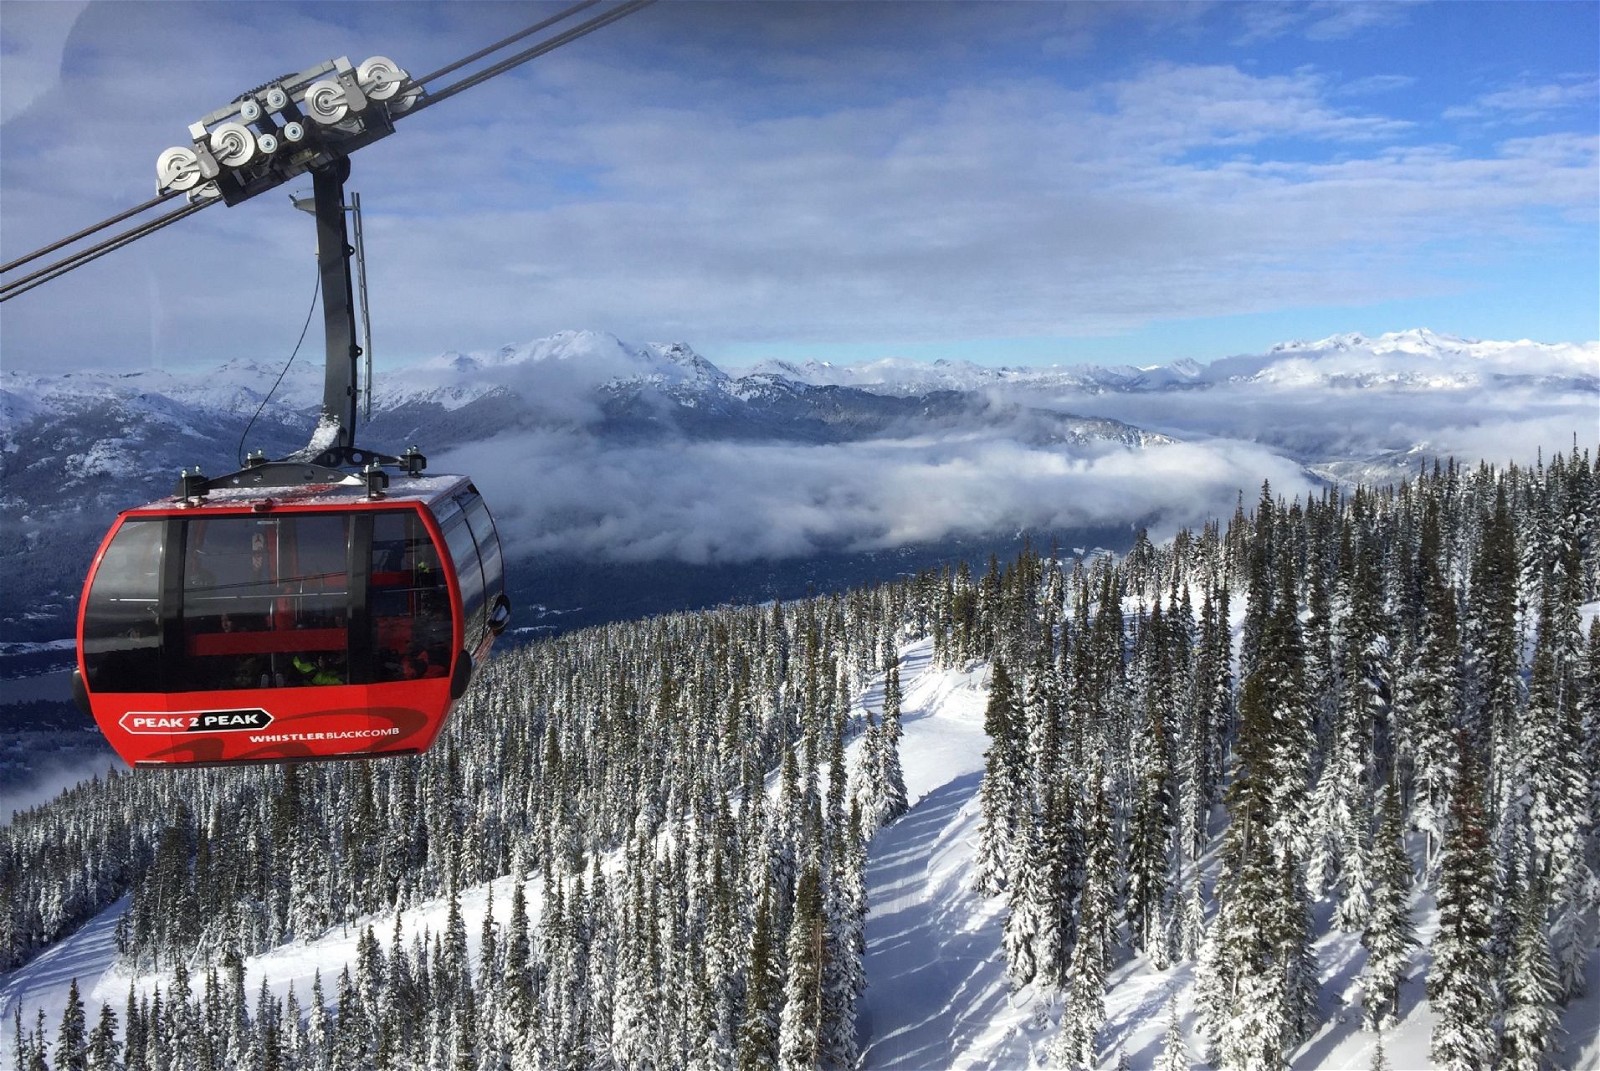 Whistler, located in British Columbia, Canada, is a popular winter vacation destination.